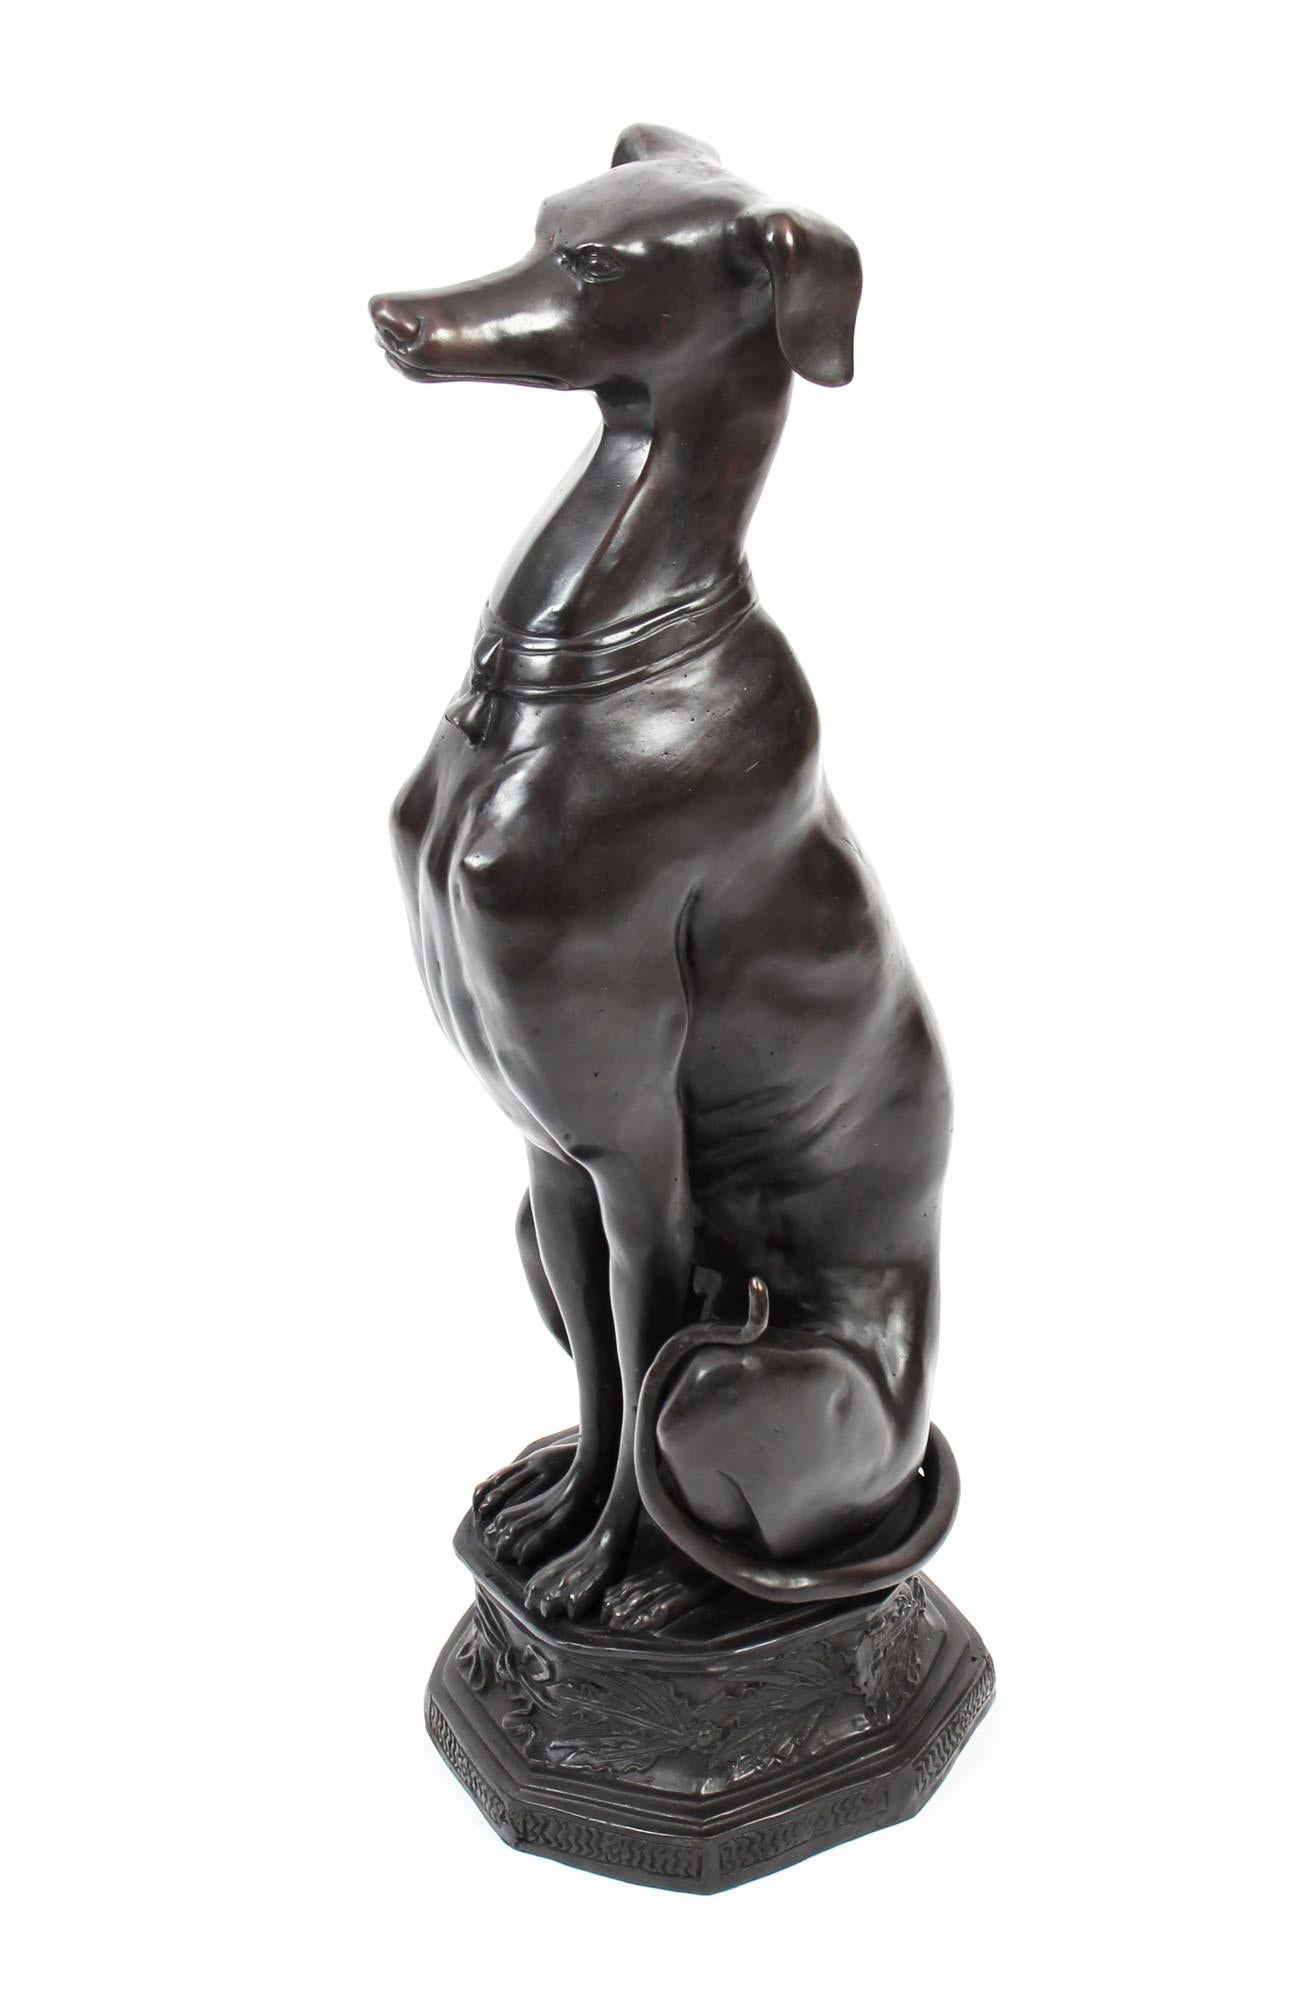 This is an impressive pair of dogs in the timeless Art Deco style, sitting attentively and awaiting the command of their master and dating from the mid-20th century.

This high quality hot cast solid bronze was produced using the traditional 'lost